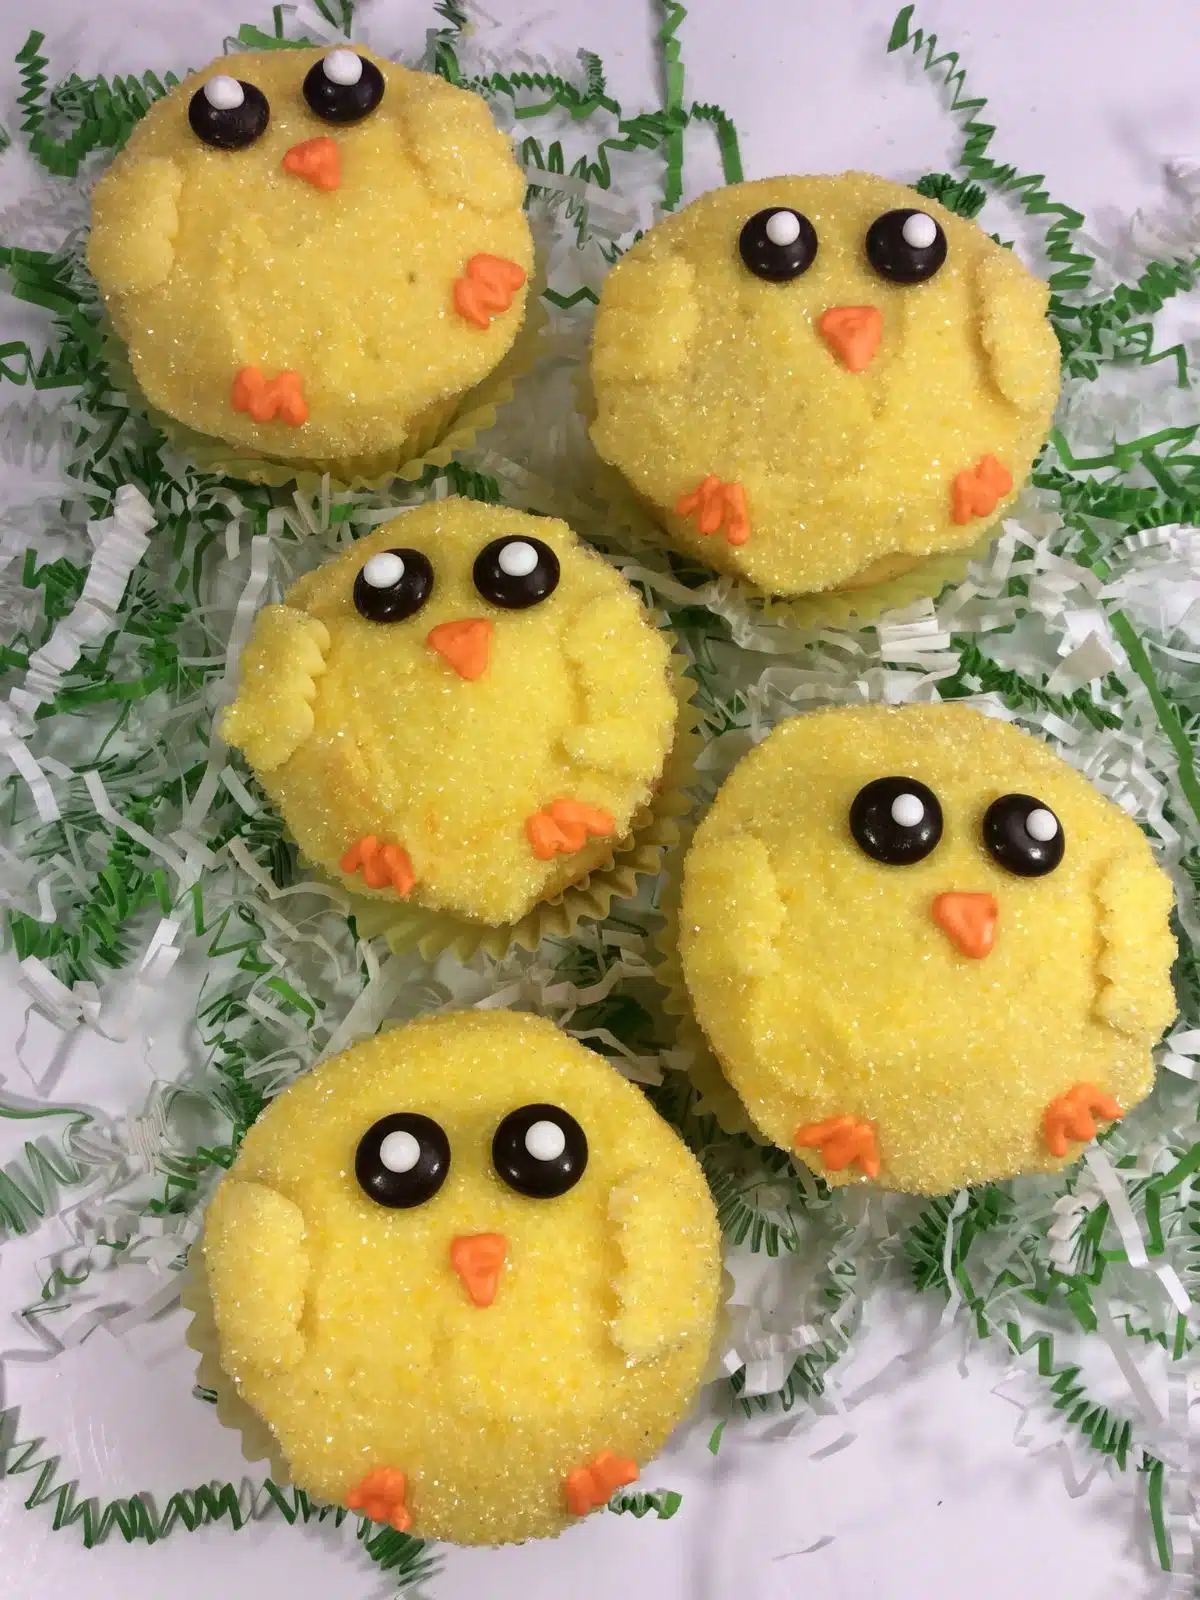 Chick cupcakes on top of green shredded paper.